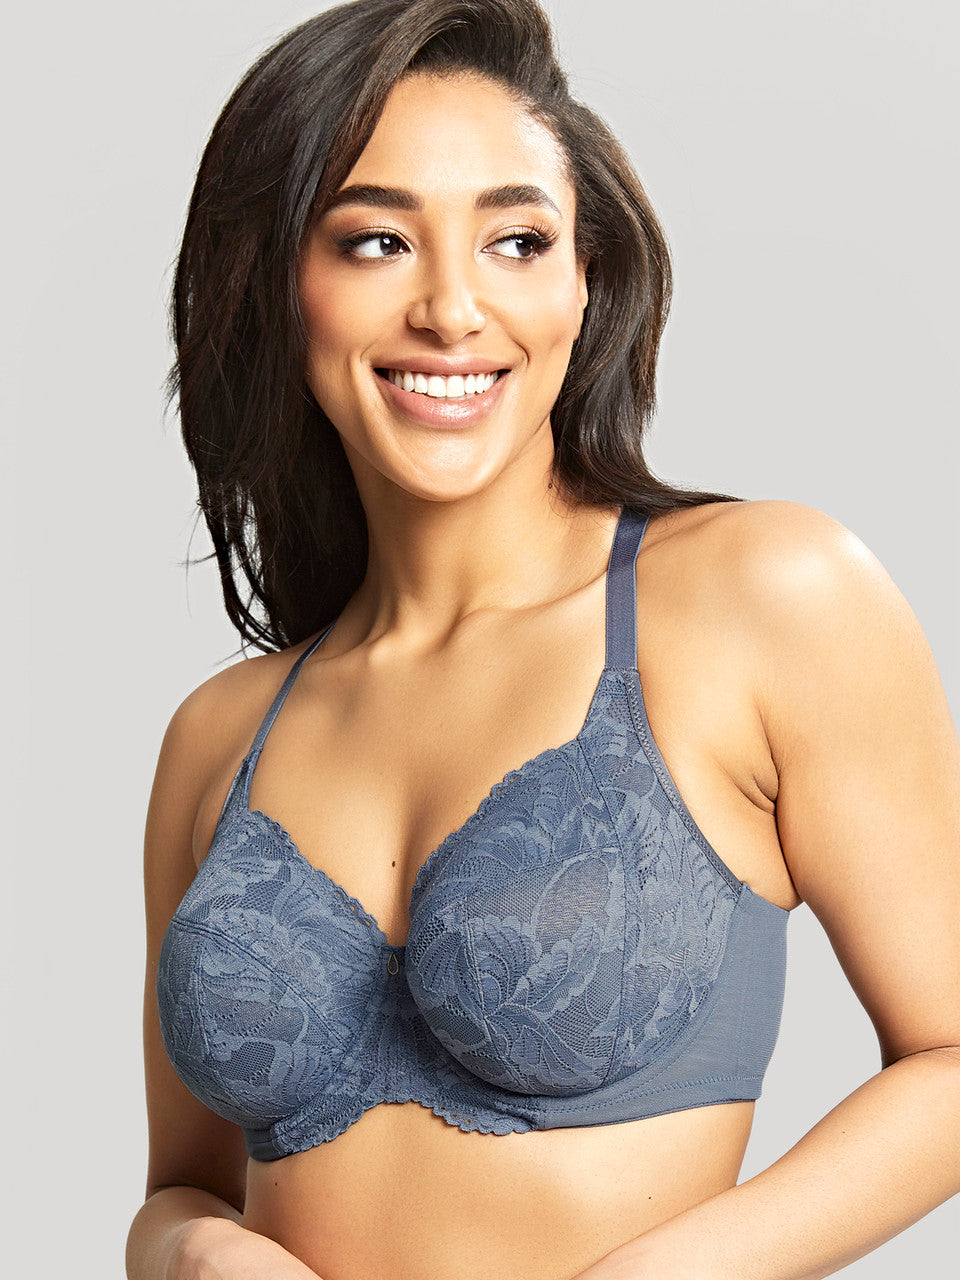 Radiance Full Coverage Bra in Steel Blue worn by model front view